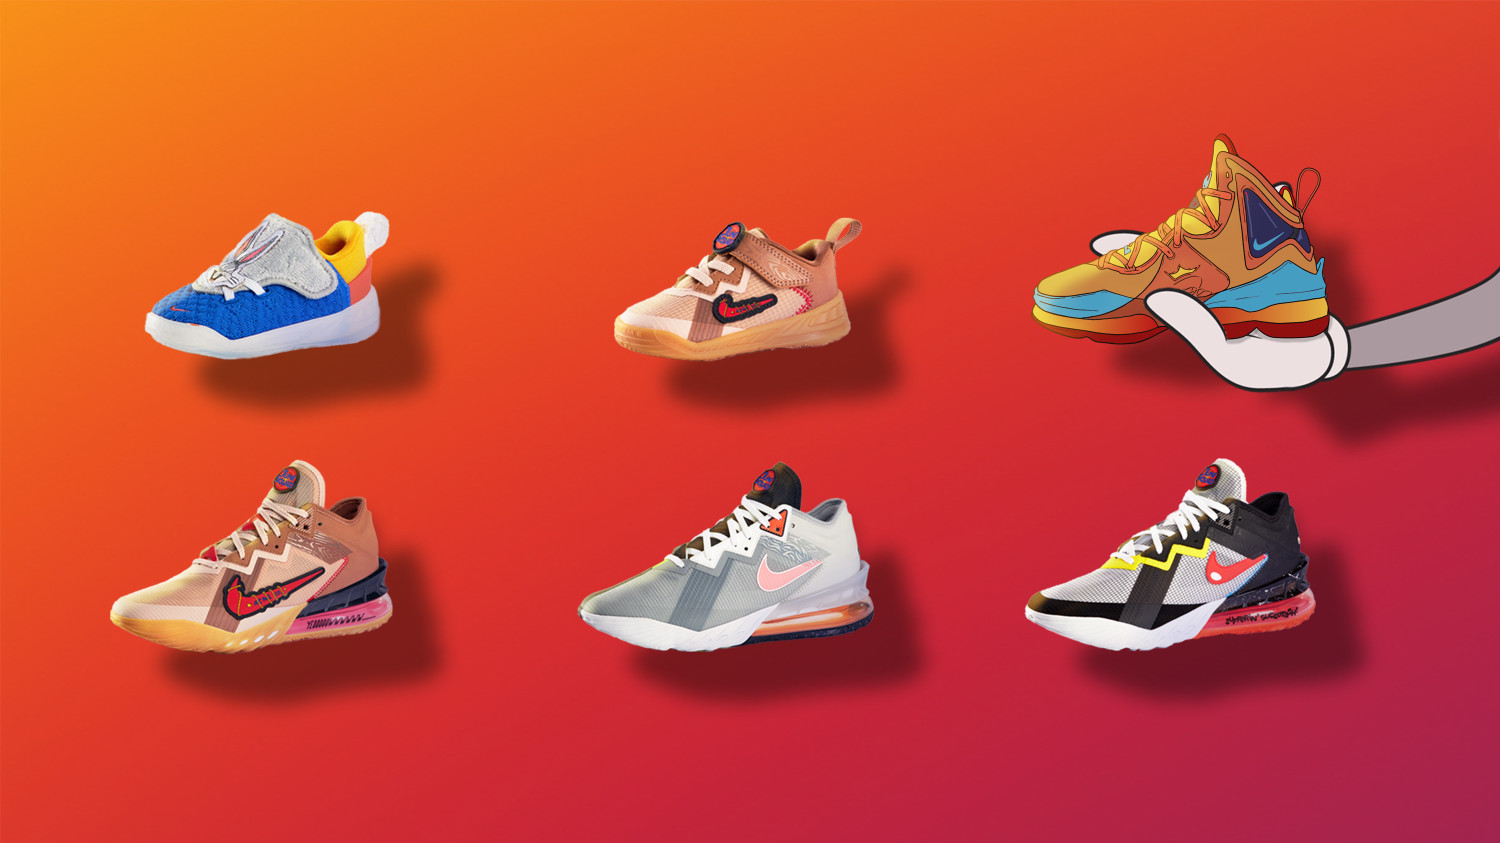 Nike LeBron 19 Reveal Highlights New Space Jam Apparel Collection